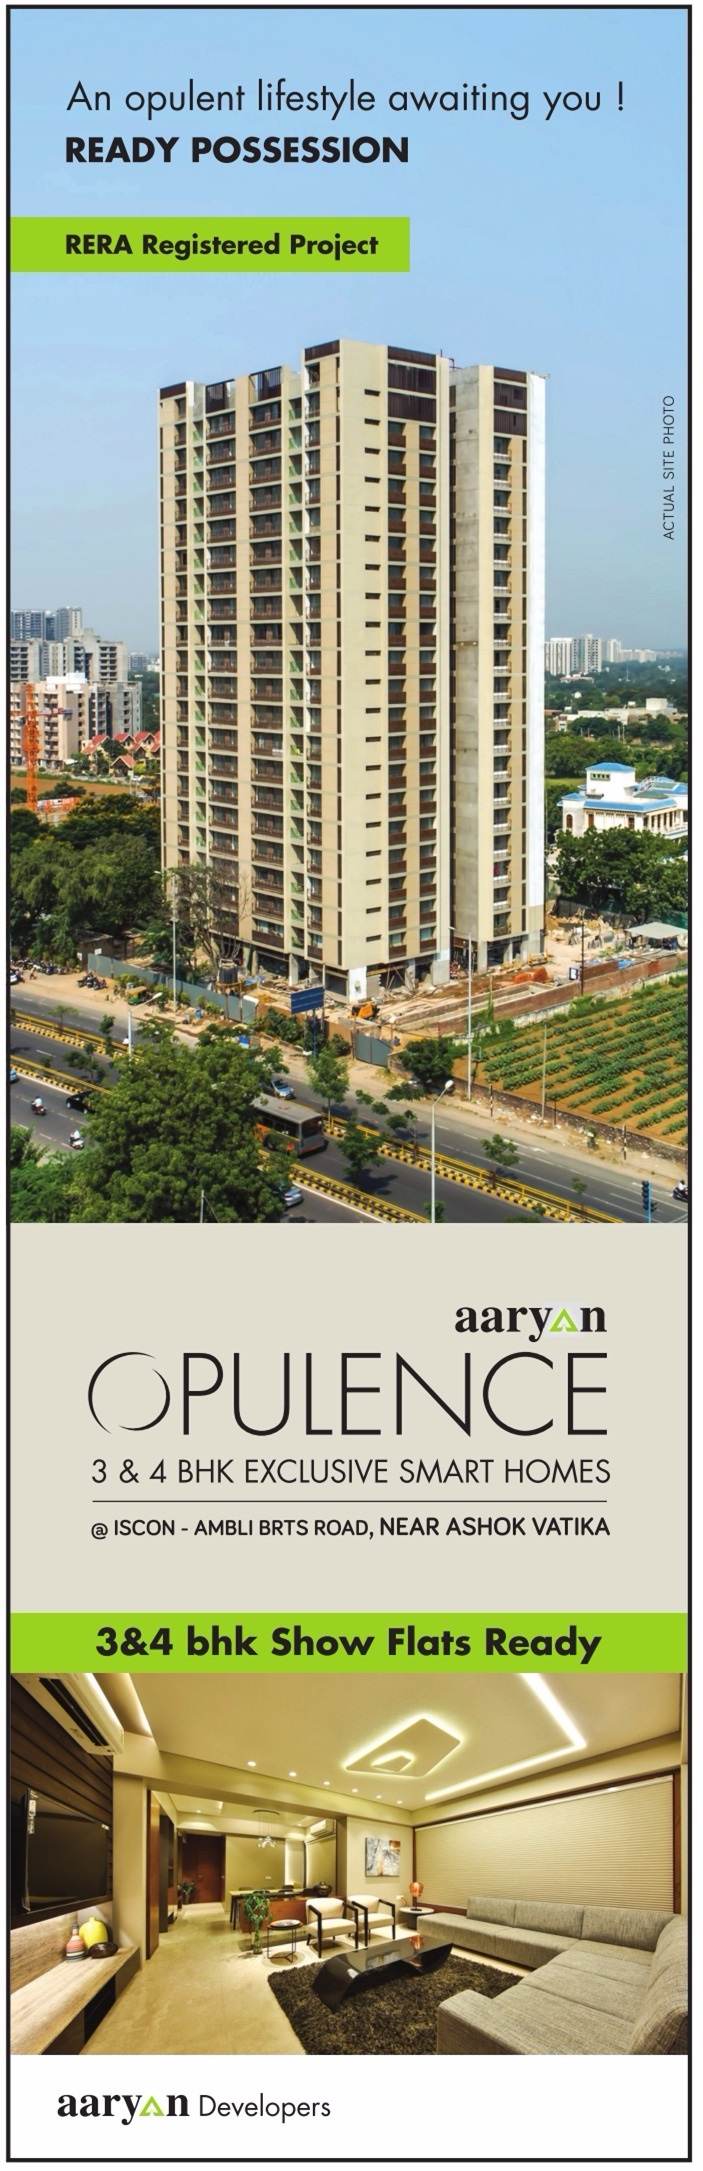 An opulent lifestyle awaiting you at Aaryan Opulence in Ahmedabad